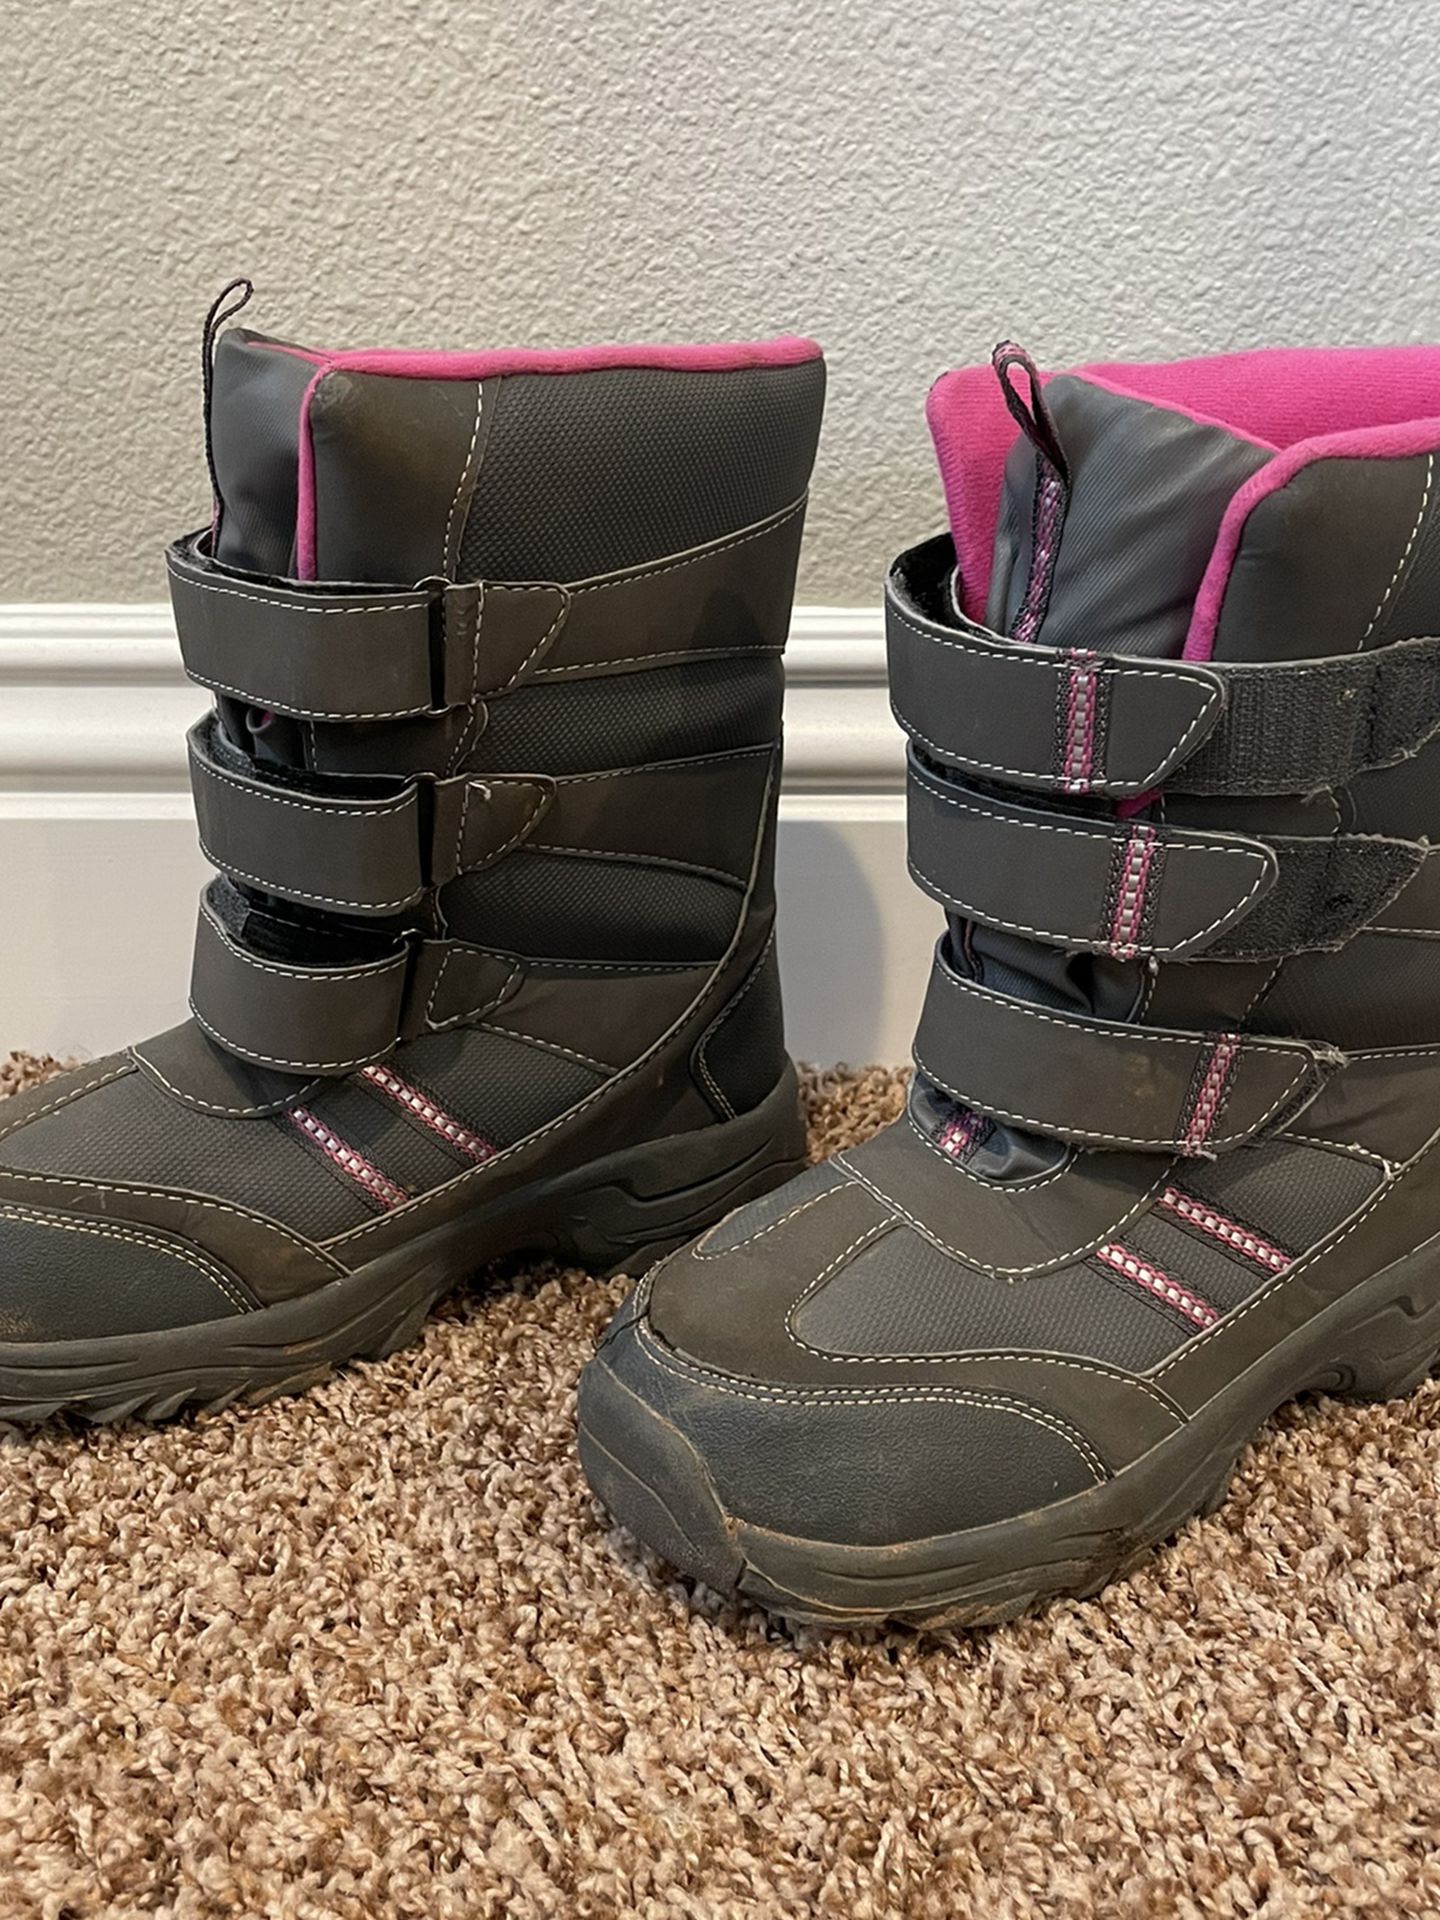 Girls Size 3 snow boots